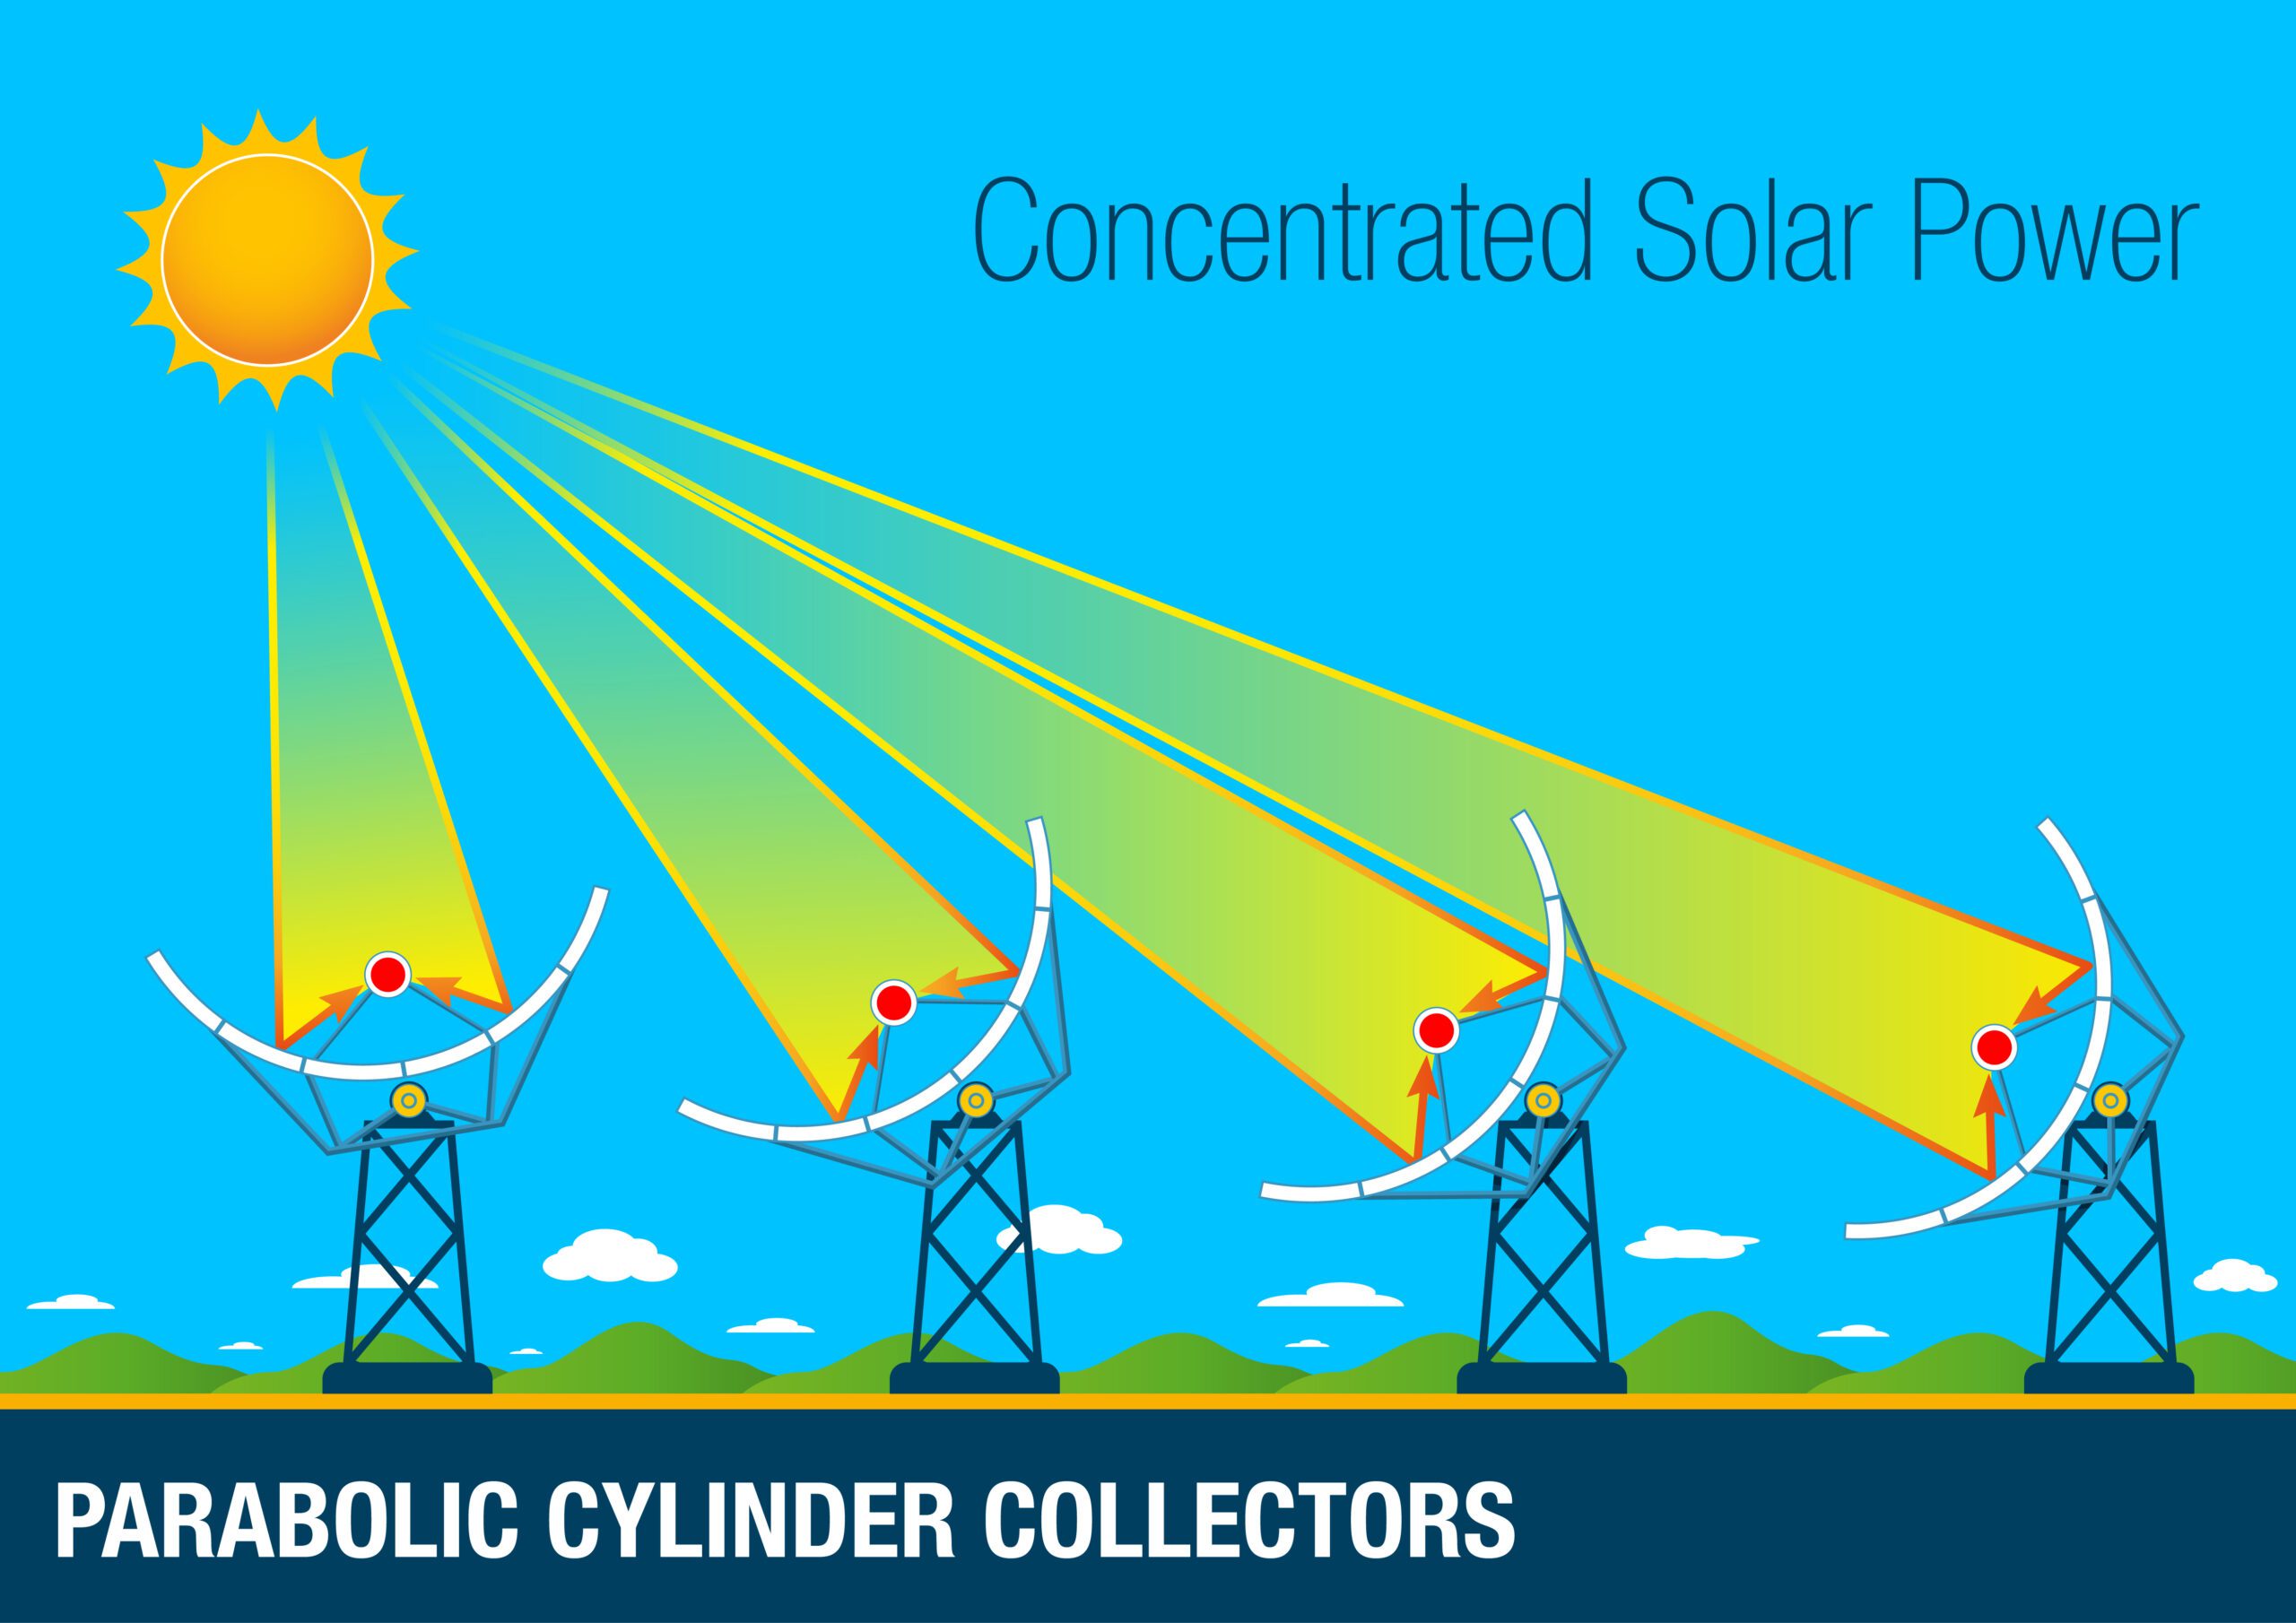 An infographic depicting parabolic cylinders generating concentrated solar power.